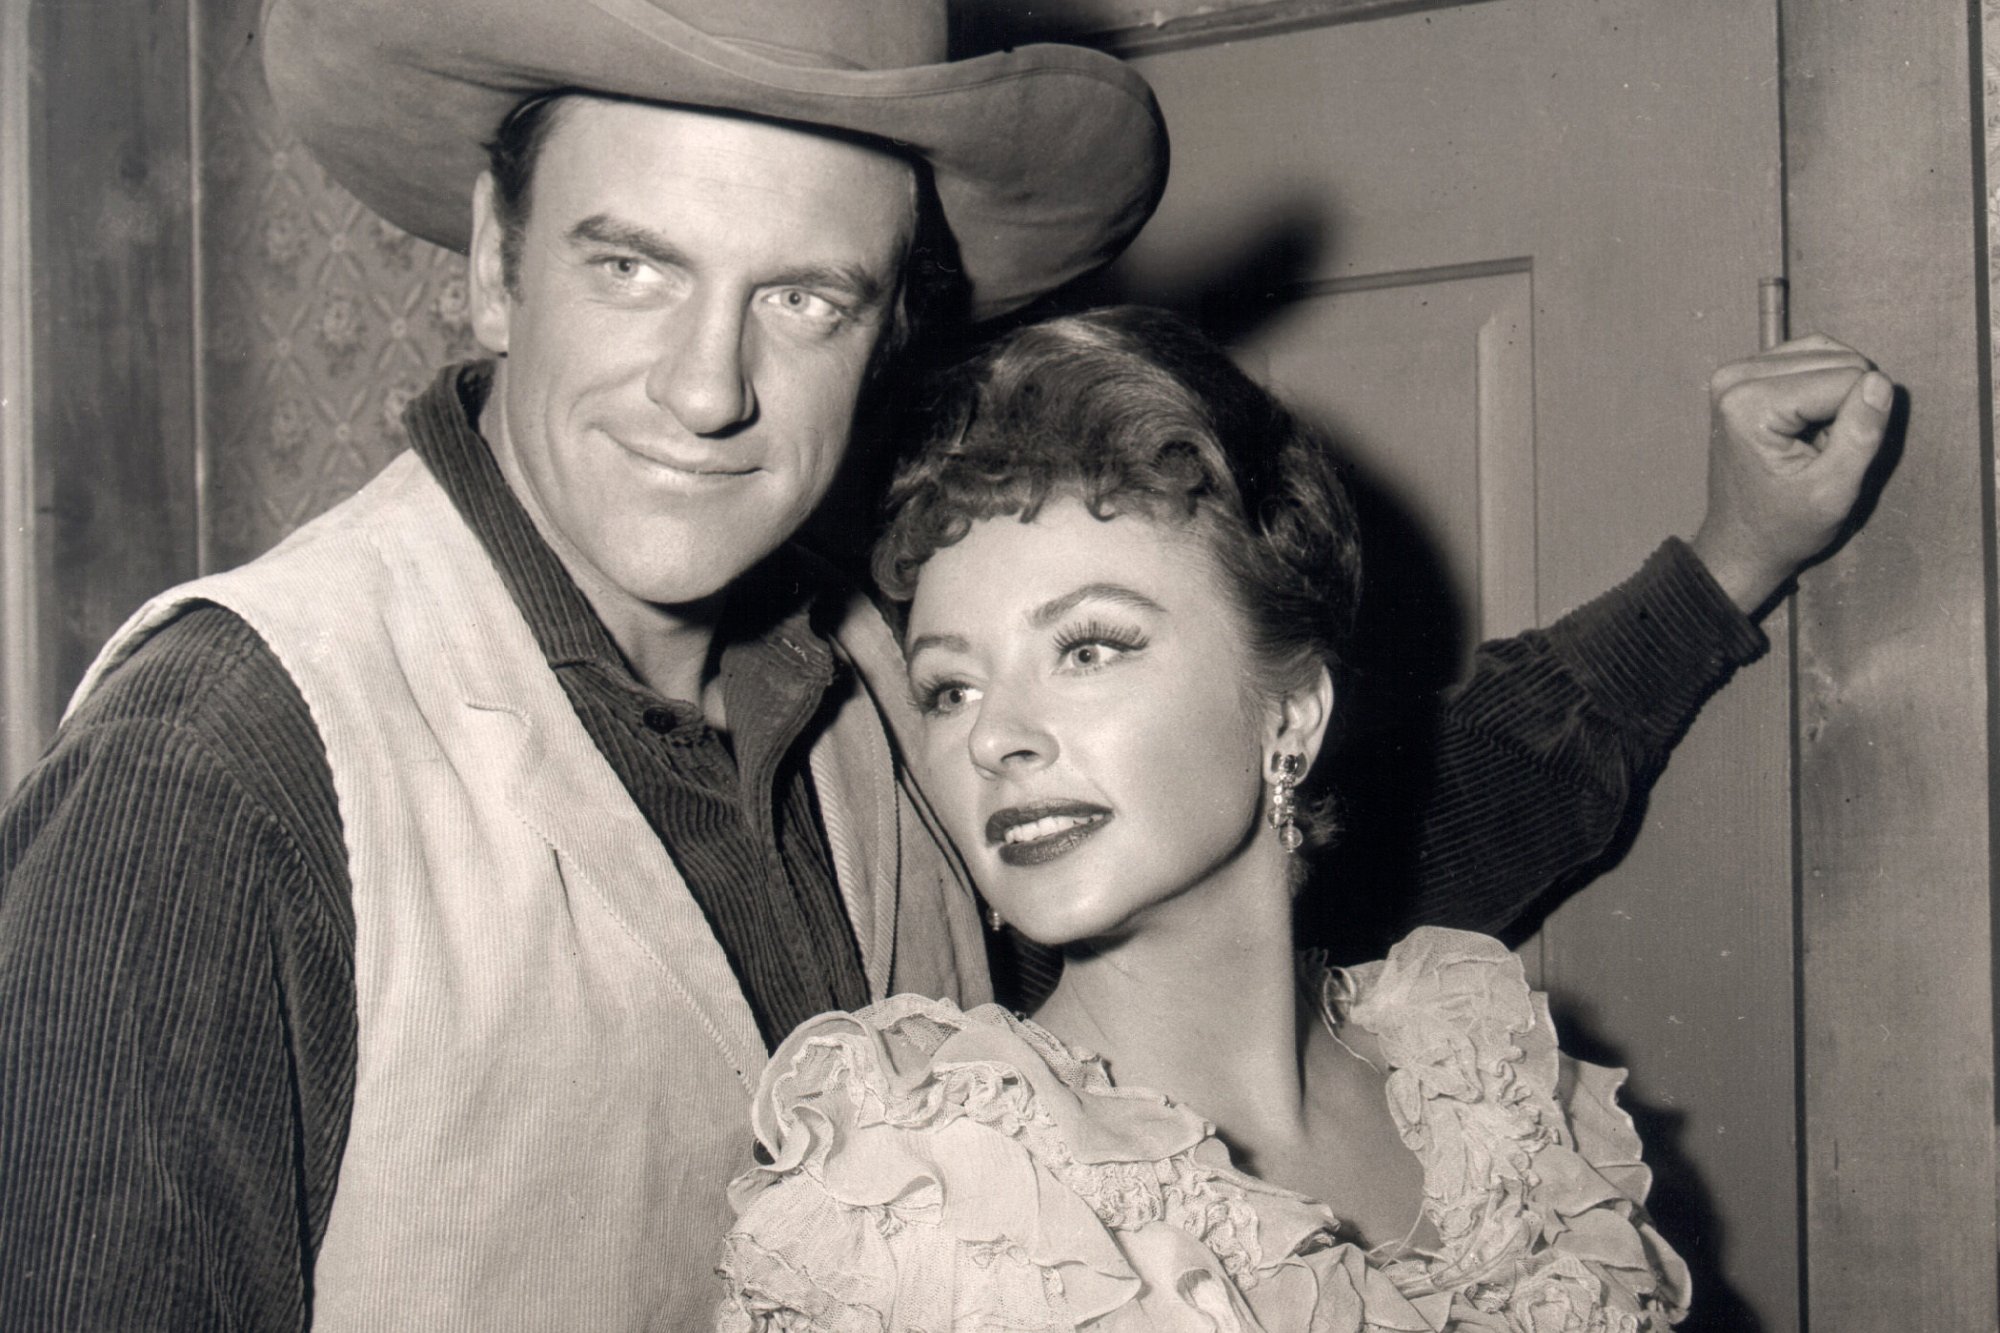 'Gunsmoke' James Arness as Matt Dillon and Amanda Blake as Kitty Russell. Arness is smiling with his arm resting on the door behind Blake.